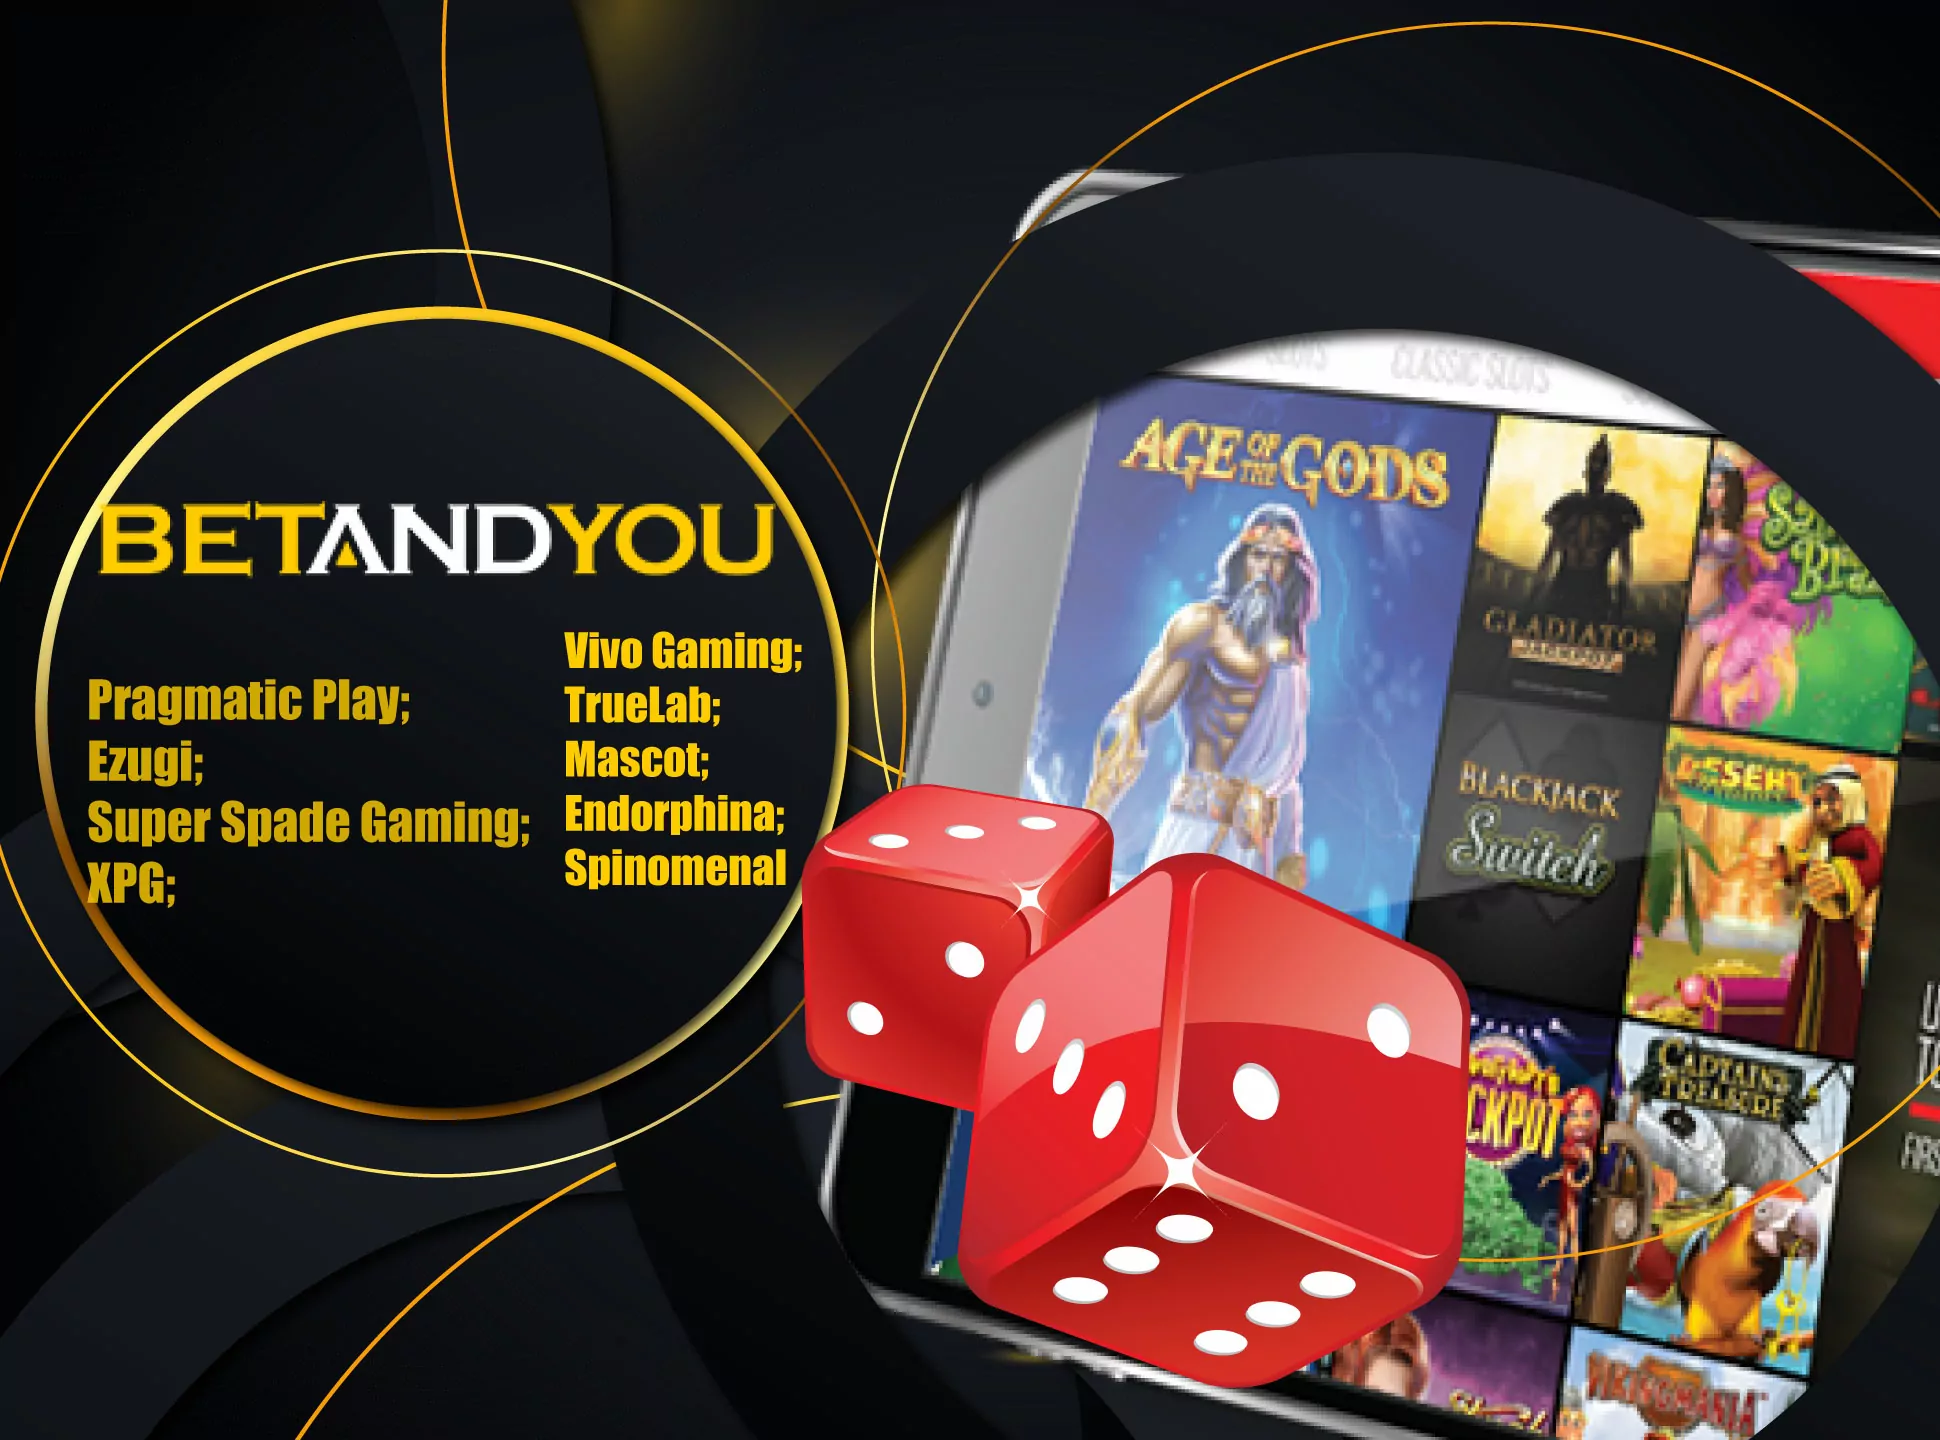 Betandyou has wide choice of games provides.